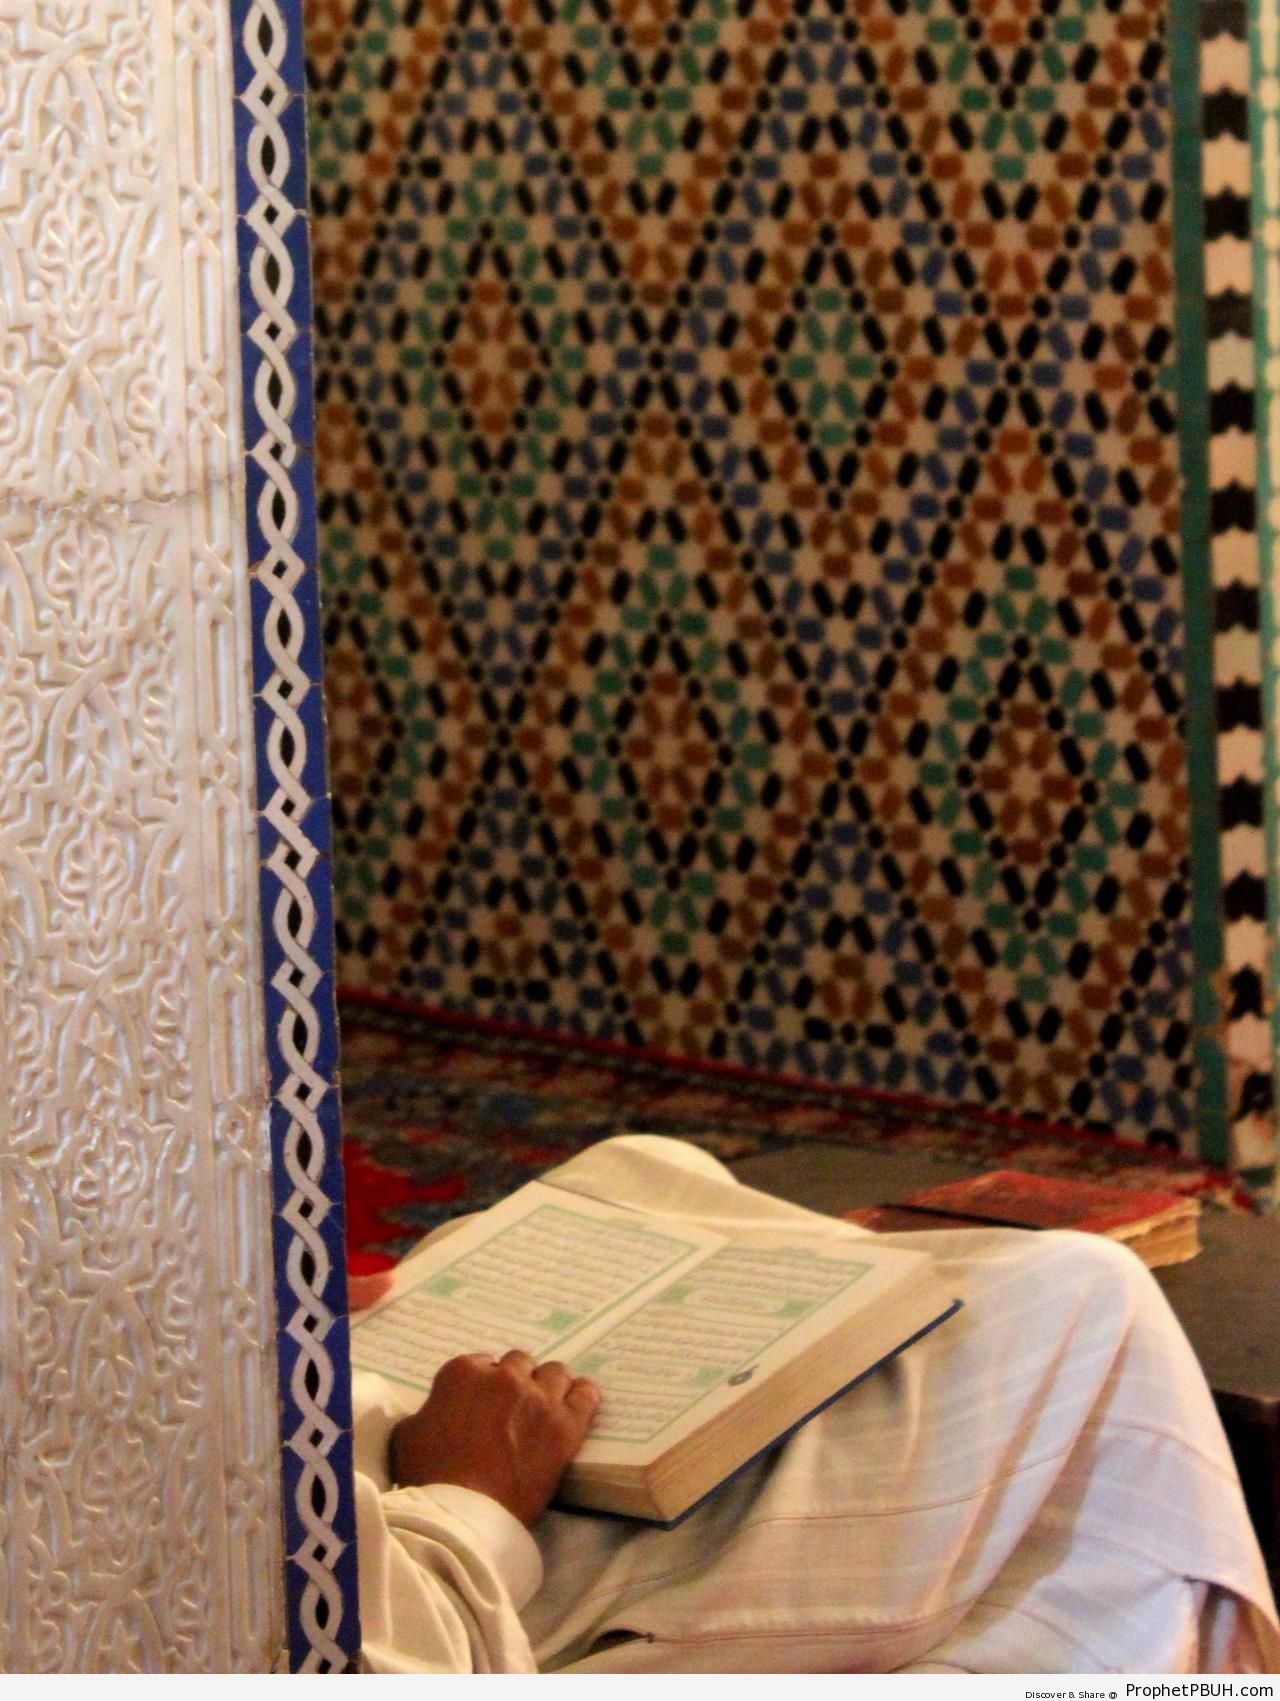 Man With Quran (Marrakech, Morocco) - Islamic Architecture 